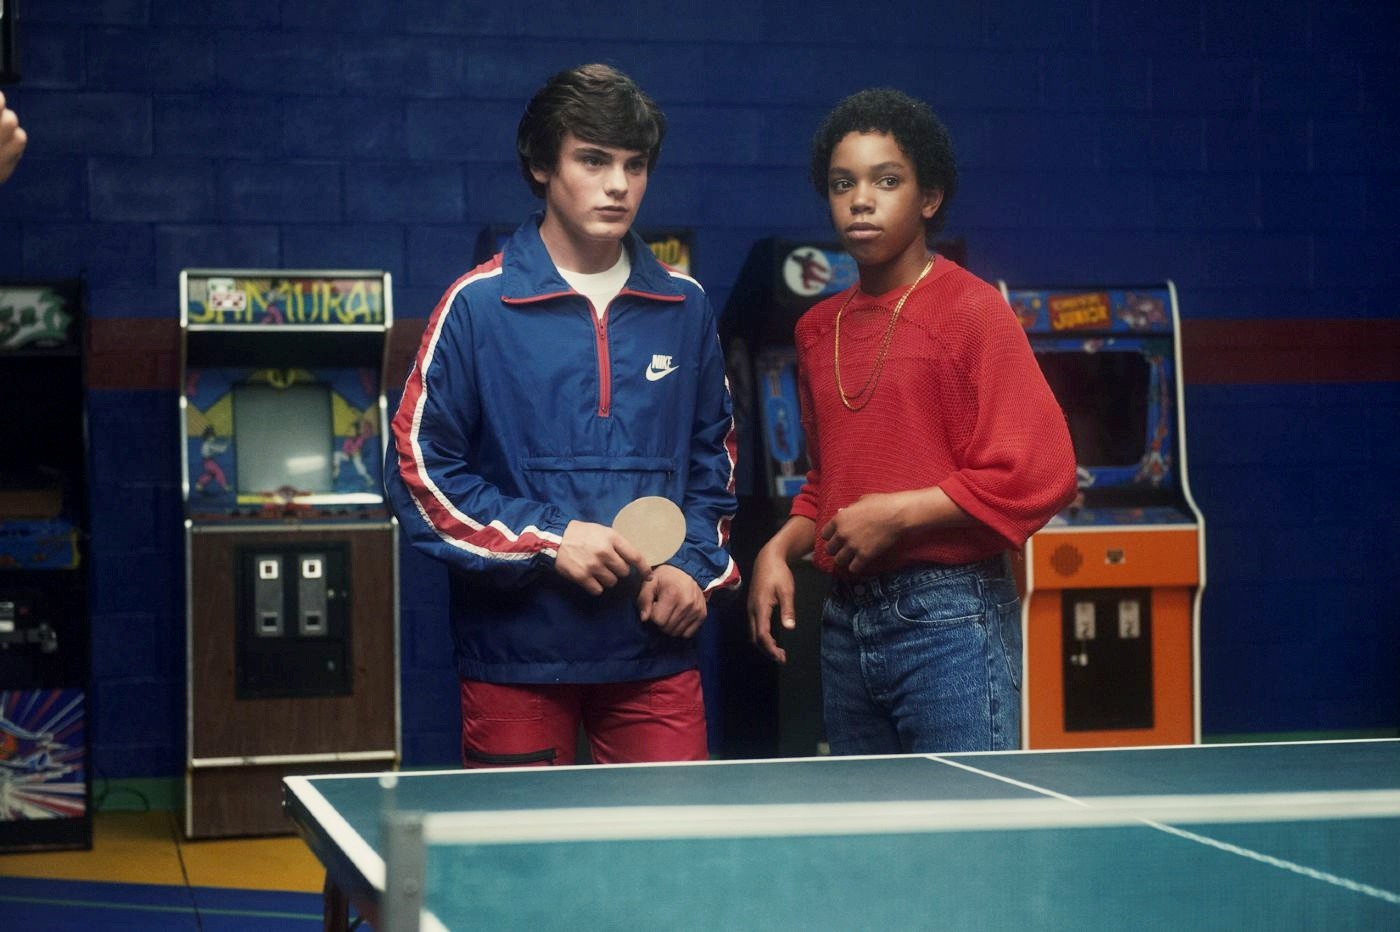 Marcello Conte stars as Rad Miracle and Myles Massey stars as Teddy Fryy in Gravitas Ventures' Ping Pong Summer (2014)